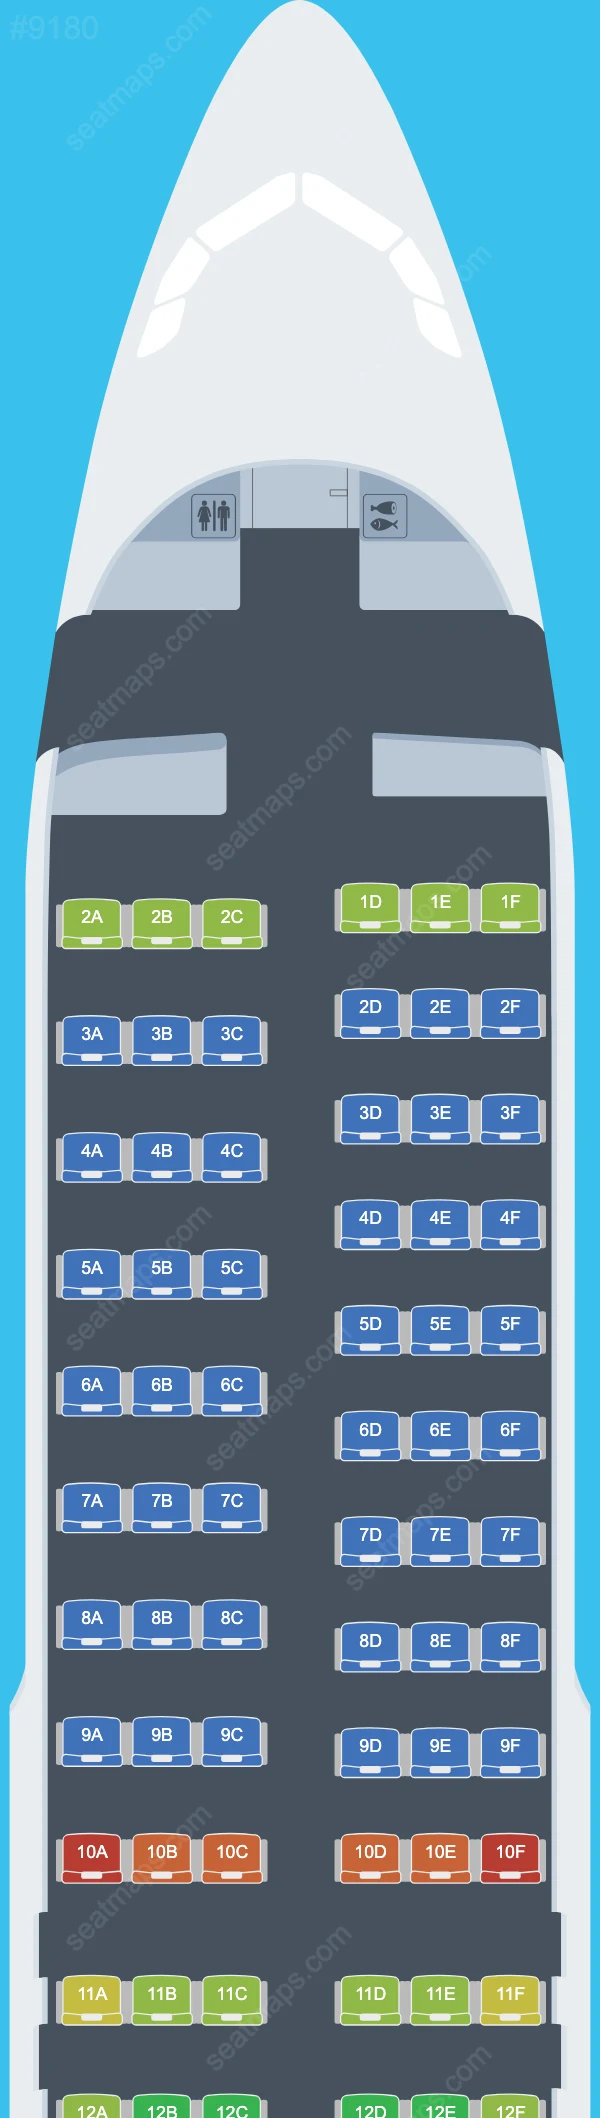 Air New Zealand Airbus A320 Seat Maps A320-200neo